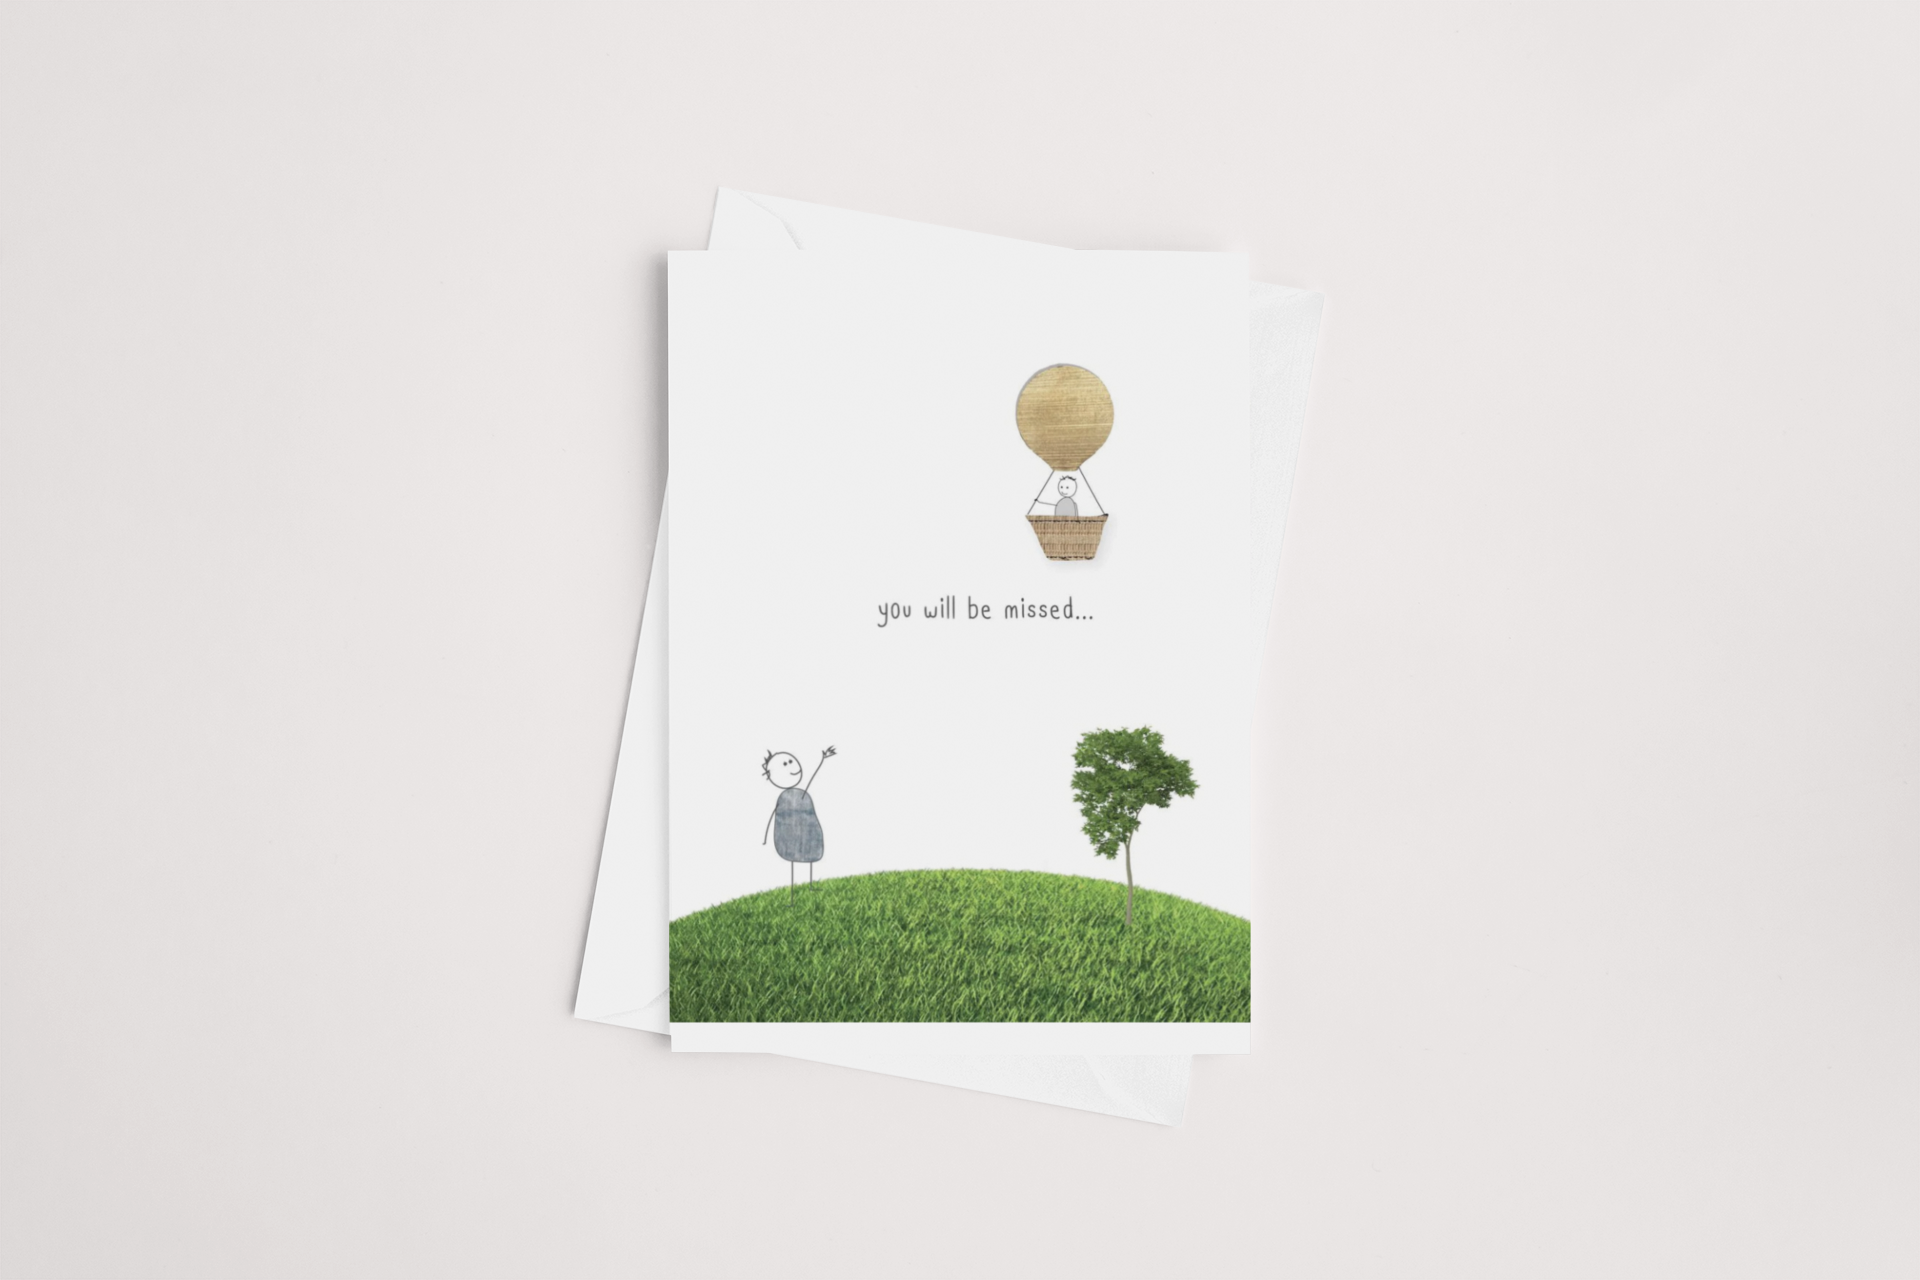 A You Will Be Missed Card featuring a simple illustration of a lone figure standing under a tree, gazing at a hot air balloon ascending into the sky, with the heartfelt message "you will be missed..." printed by icandy.